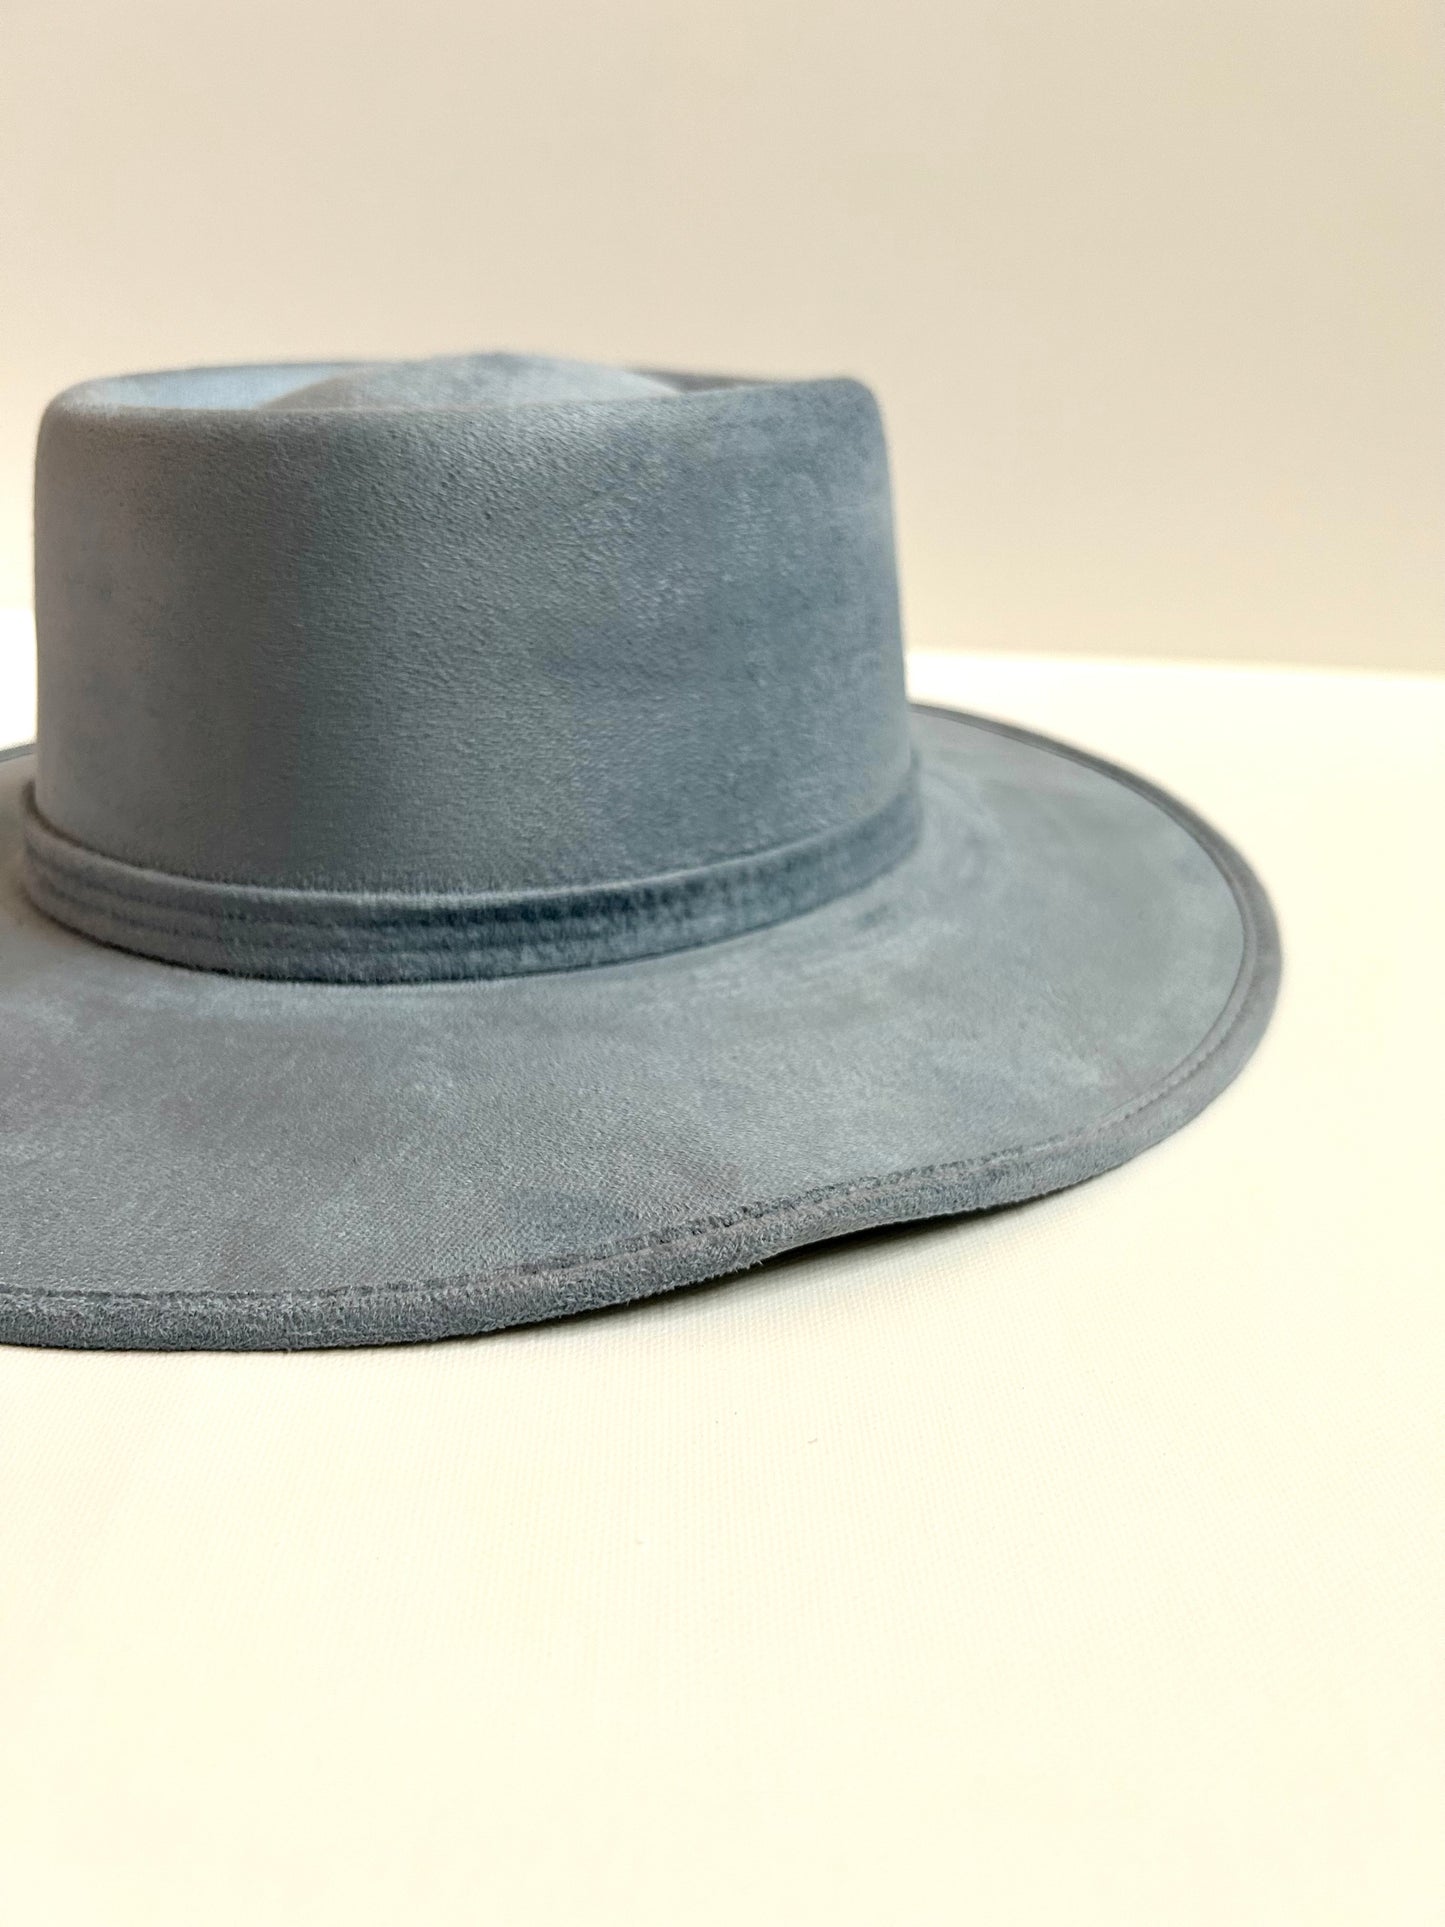 Imperfect Vegan Suede Hat - Boater  - Steele Blue